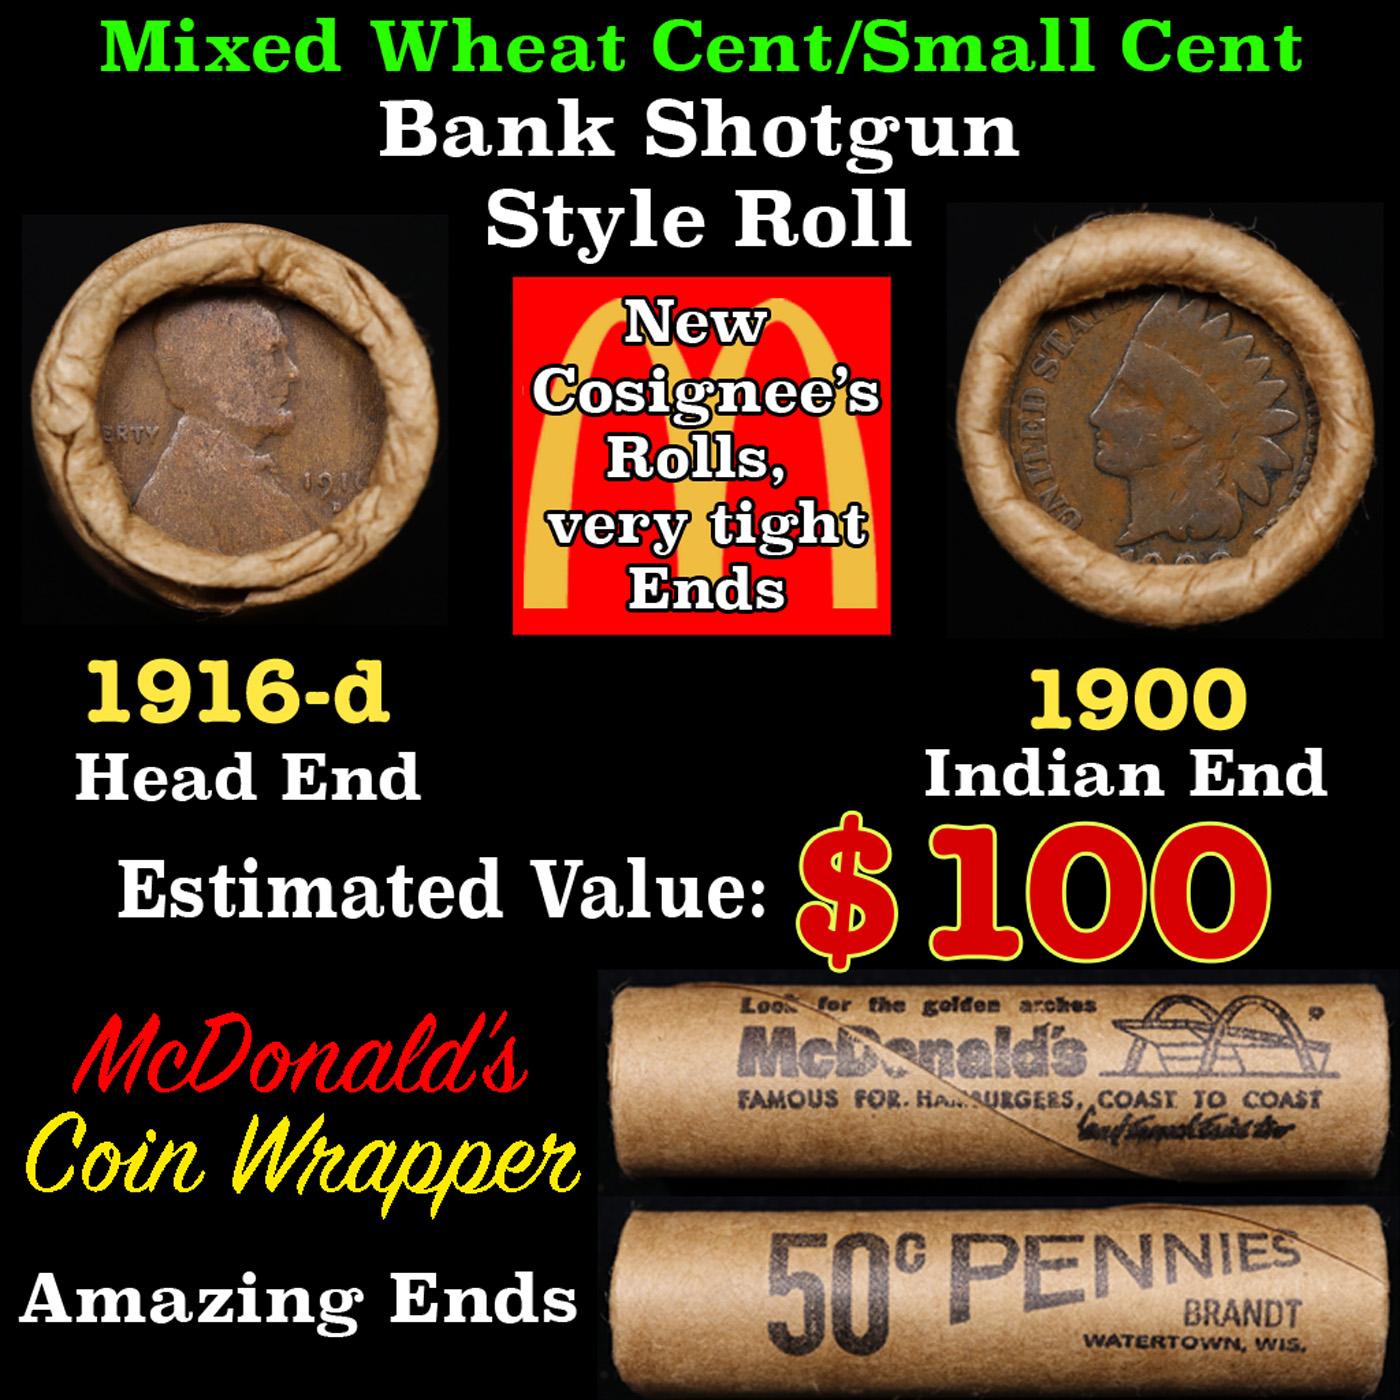 Lincoln Wheat Cent 1c Mixed Roll Orig Brandt McDonalds Wrapper, 1916-d end, 1900 Indian other end